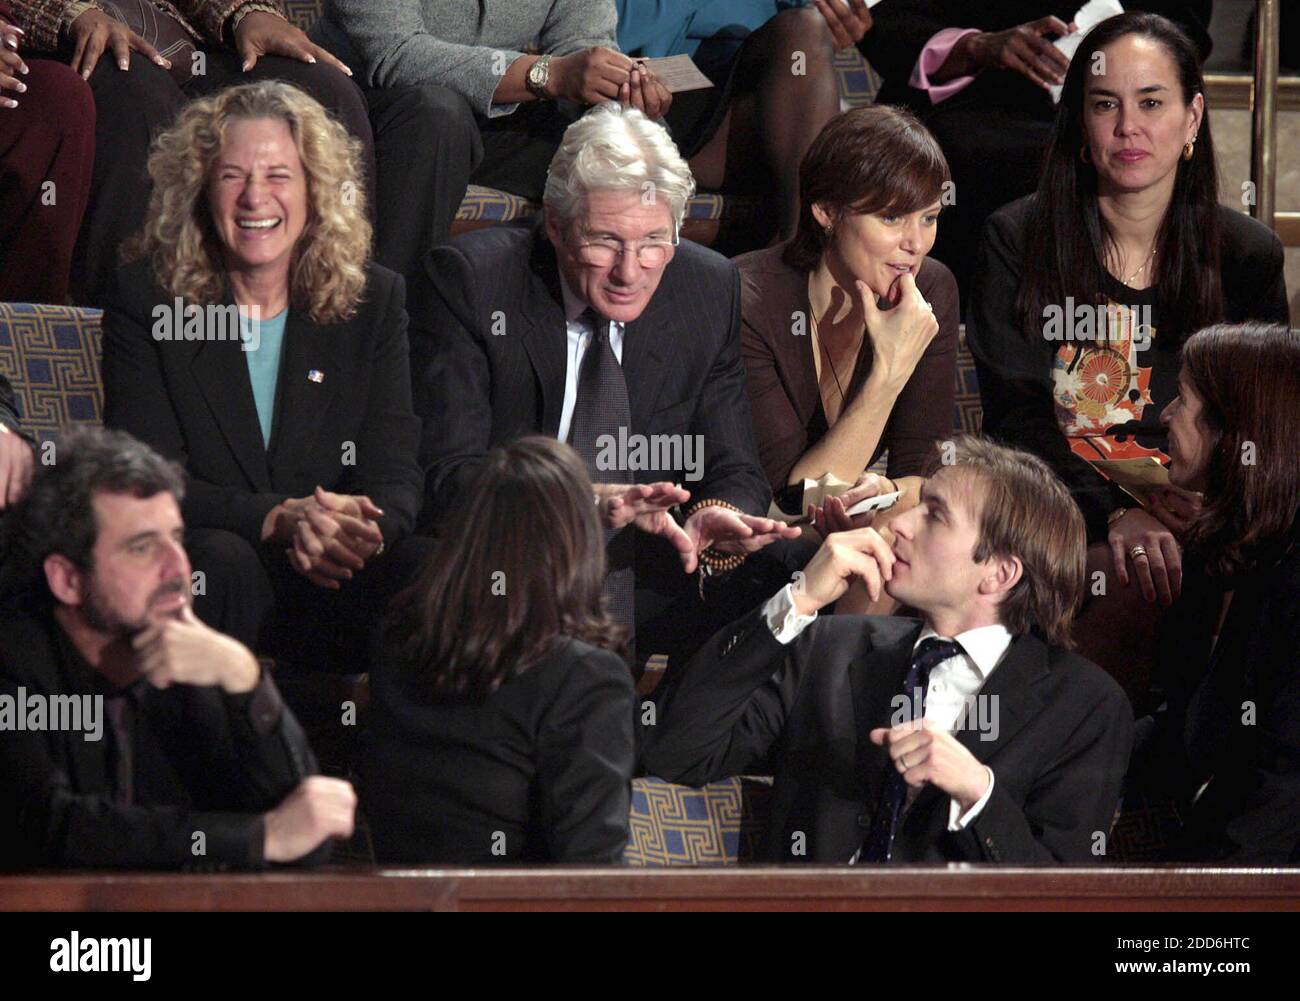 NO FILM, NO VIDEO, NO TV, NO DOCUMENTARY - Actor Richard Gere (center) and singer Carole King (left) watch from the balcony at the nomination process for Speaker of the House Nancy Pelosi during a swearing-in ceremony for the 110th Congress in the House Chamber of the U.S. Capitol on January 4, 2006, in Washington, DC, US. Photo by Chuck Kennedy/MCT/ABACAPRESS.COM Stock Photo